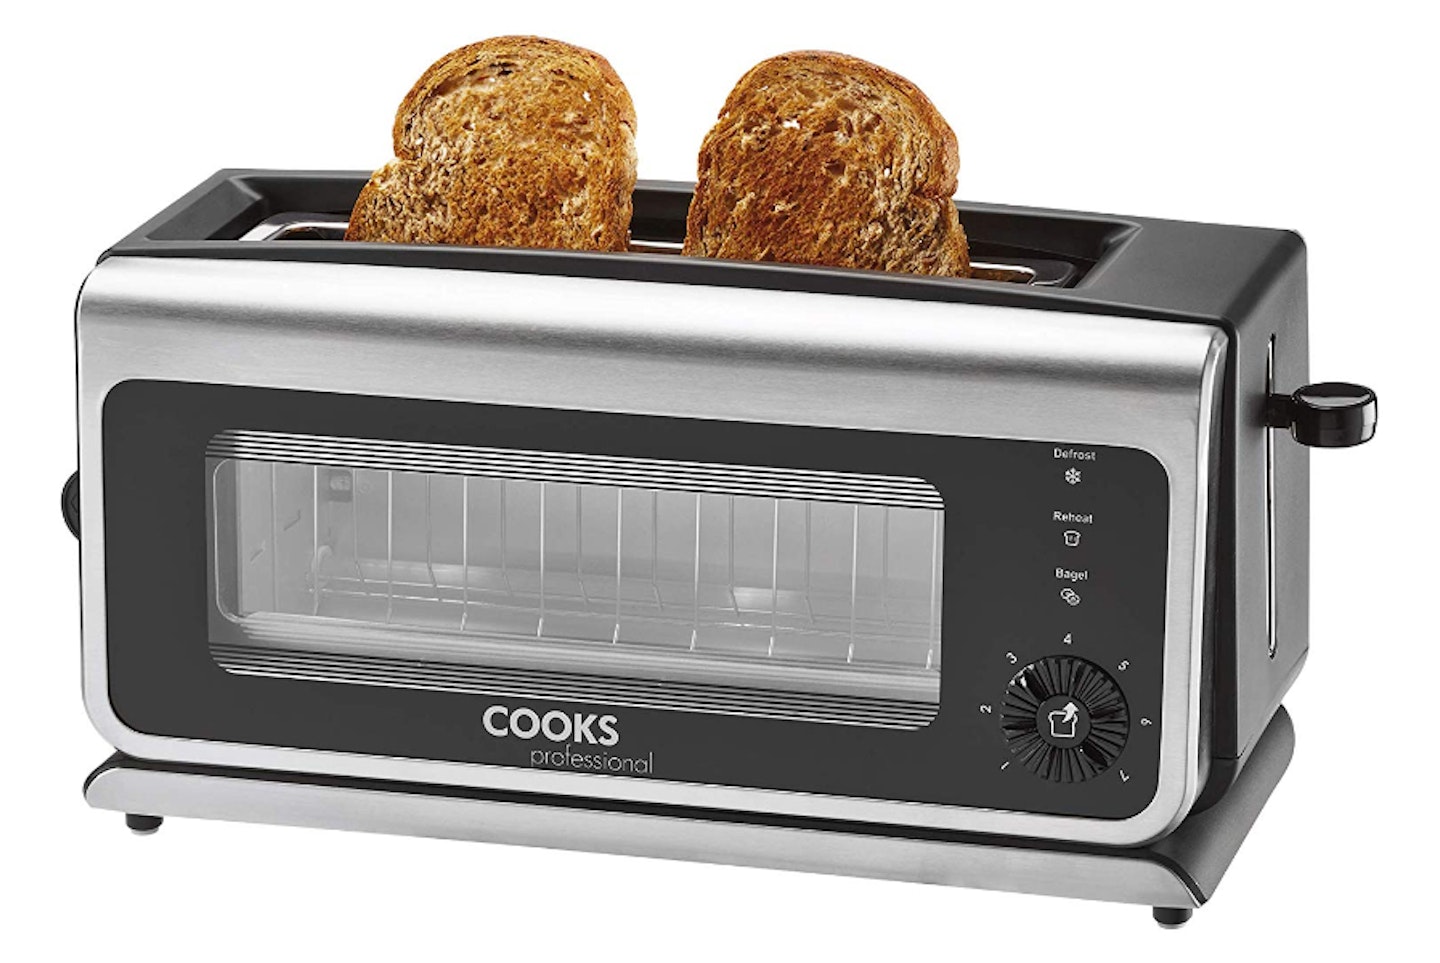 Cooks Professional 2 Slice Glass Toaster with Viewing Window